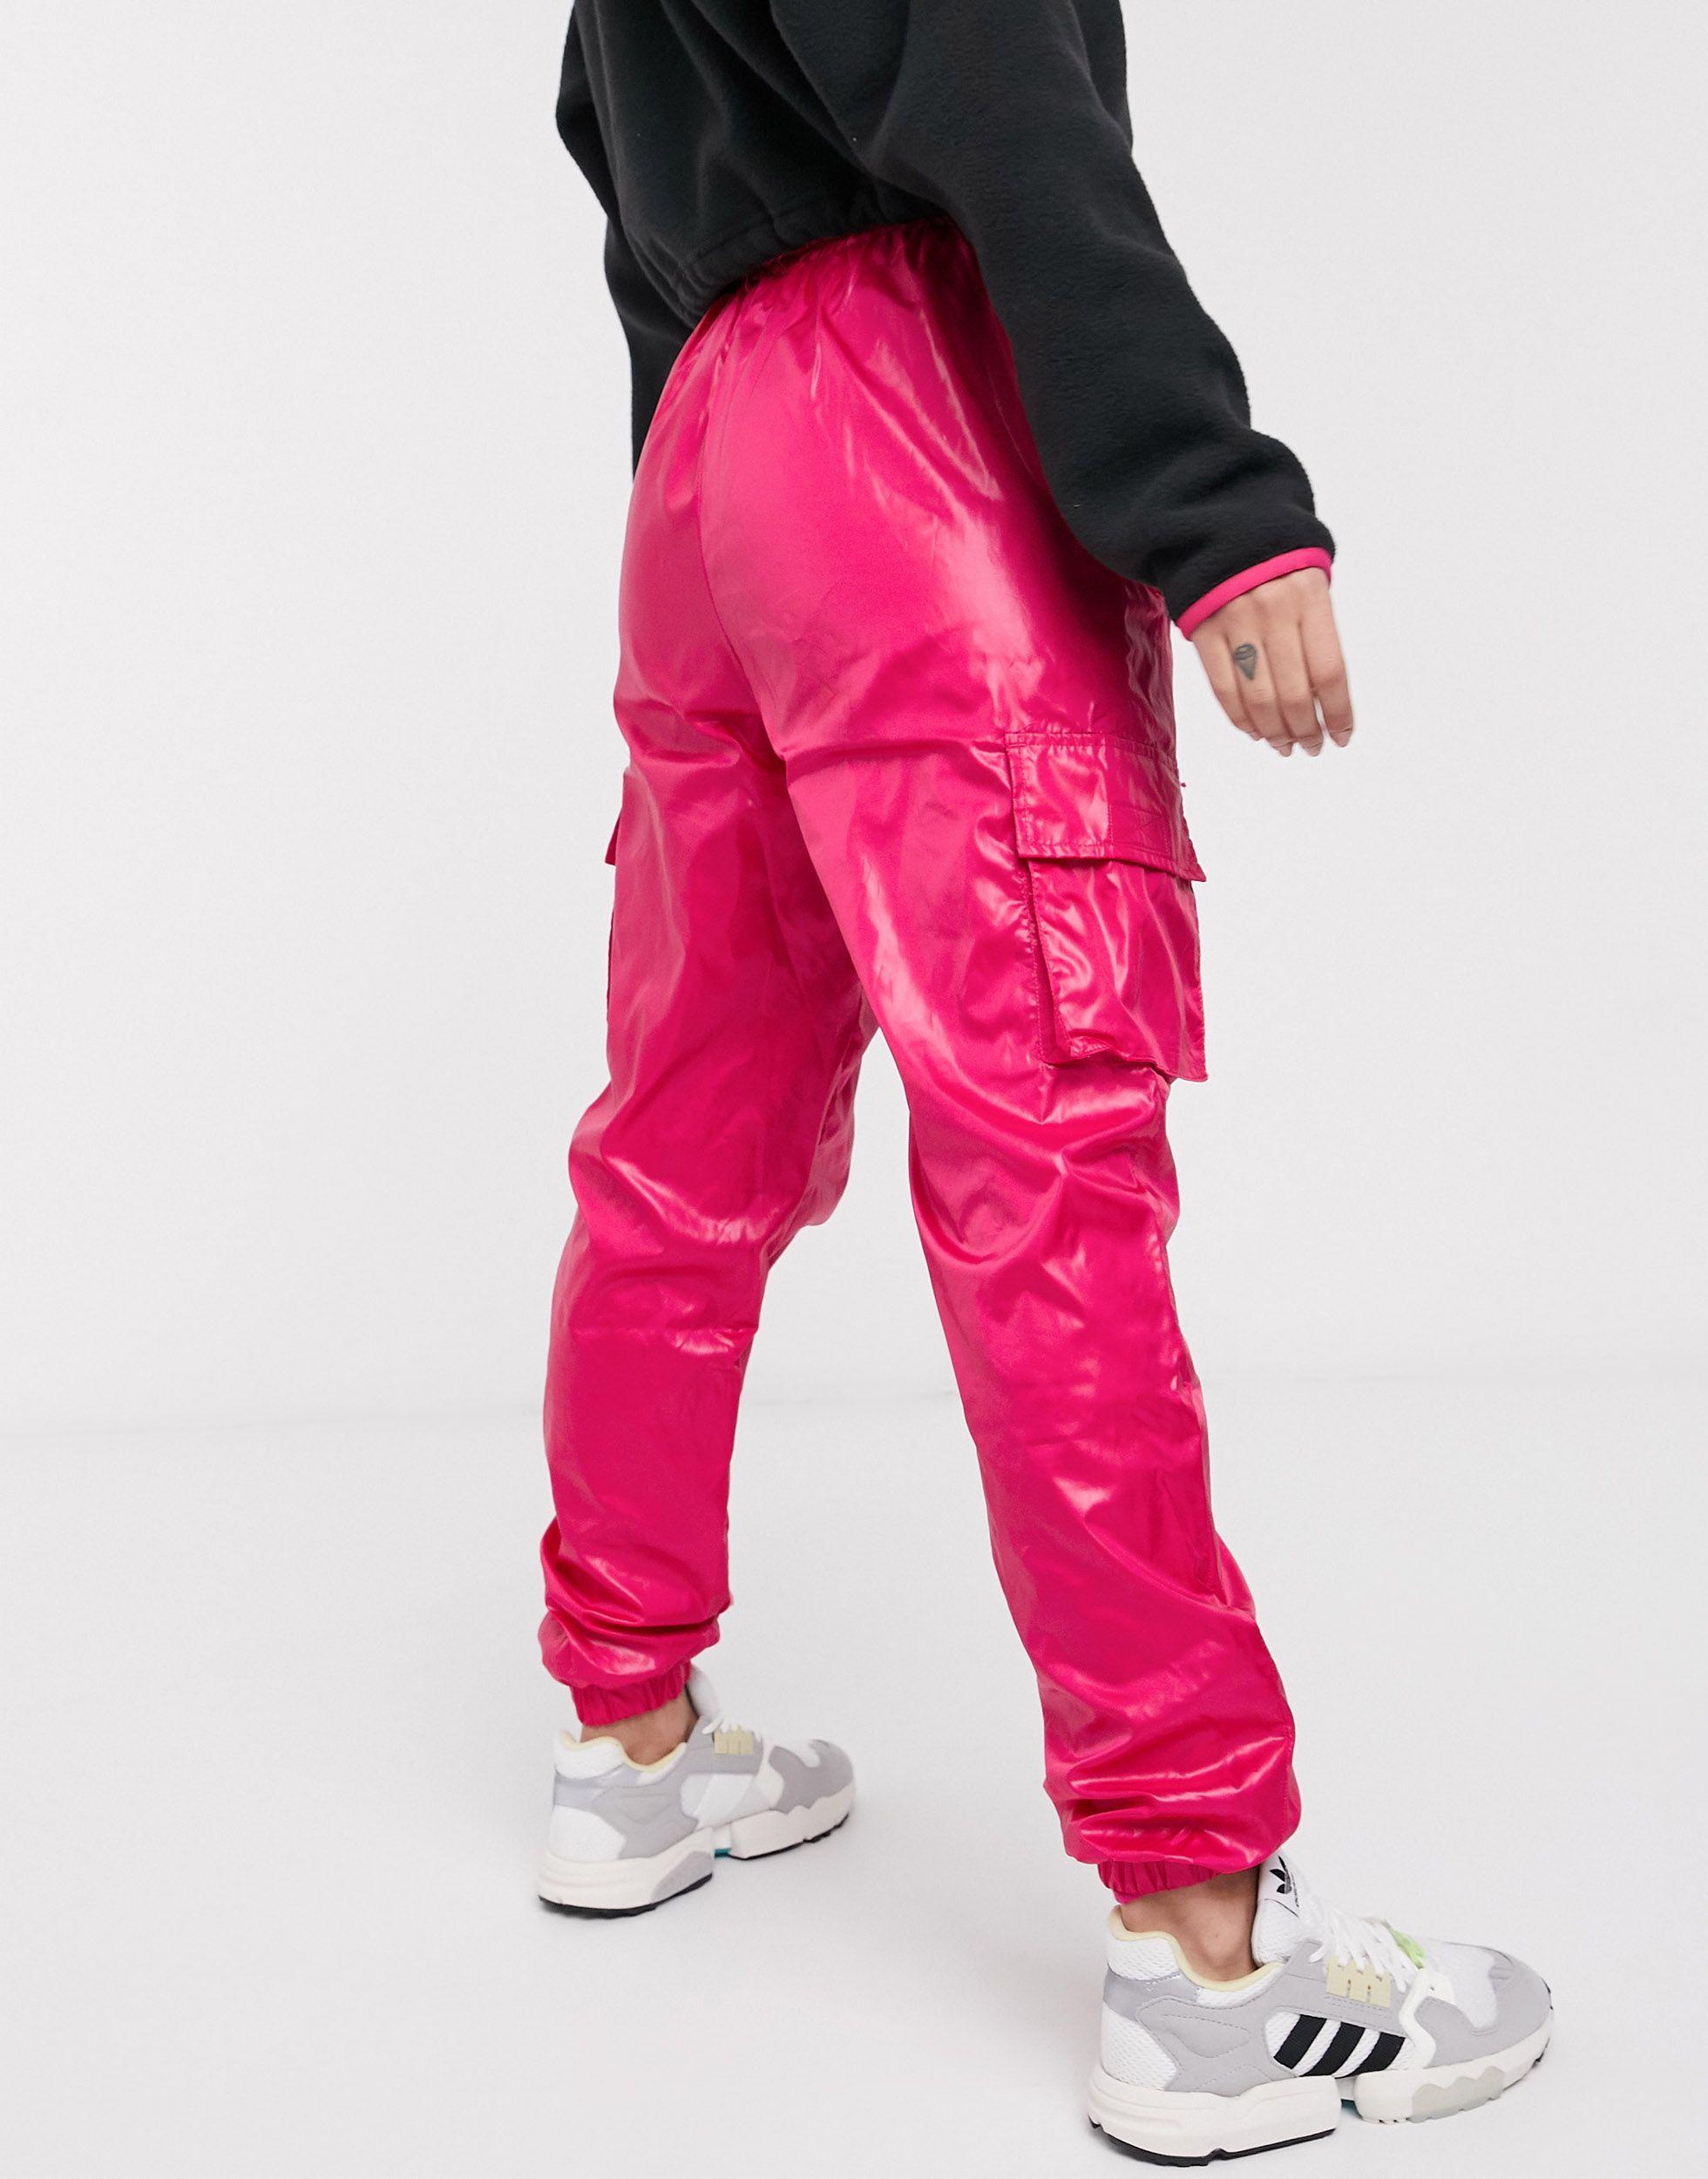 adidas Originals Cotton Tech Utility Pants in Pink | Lyst